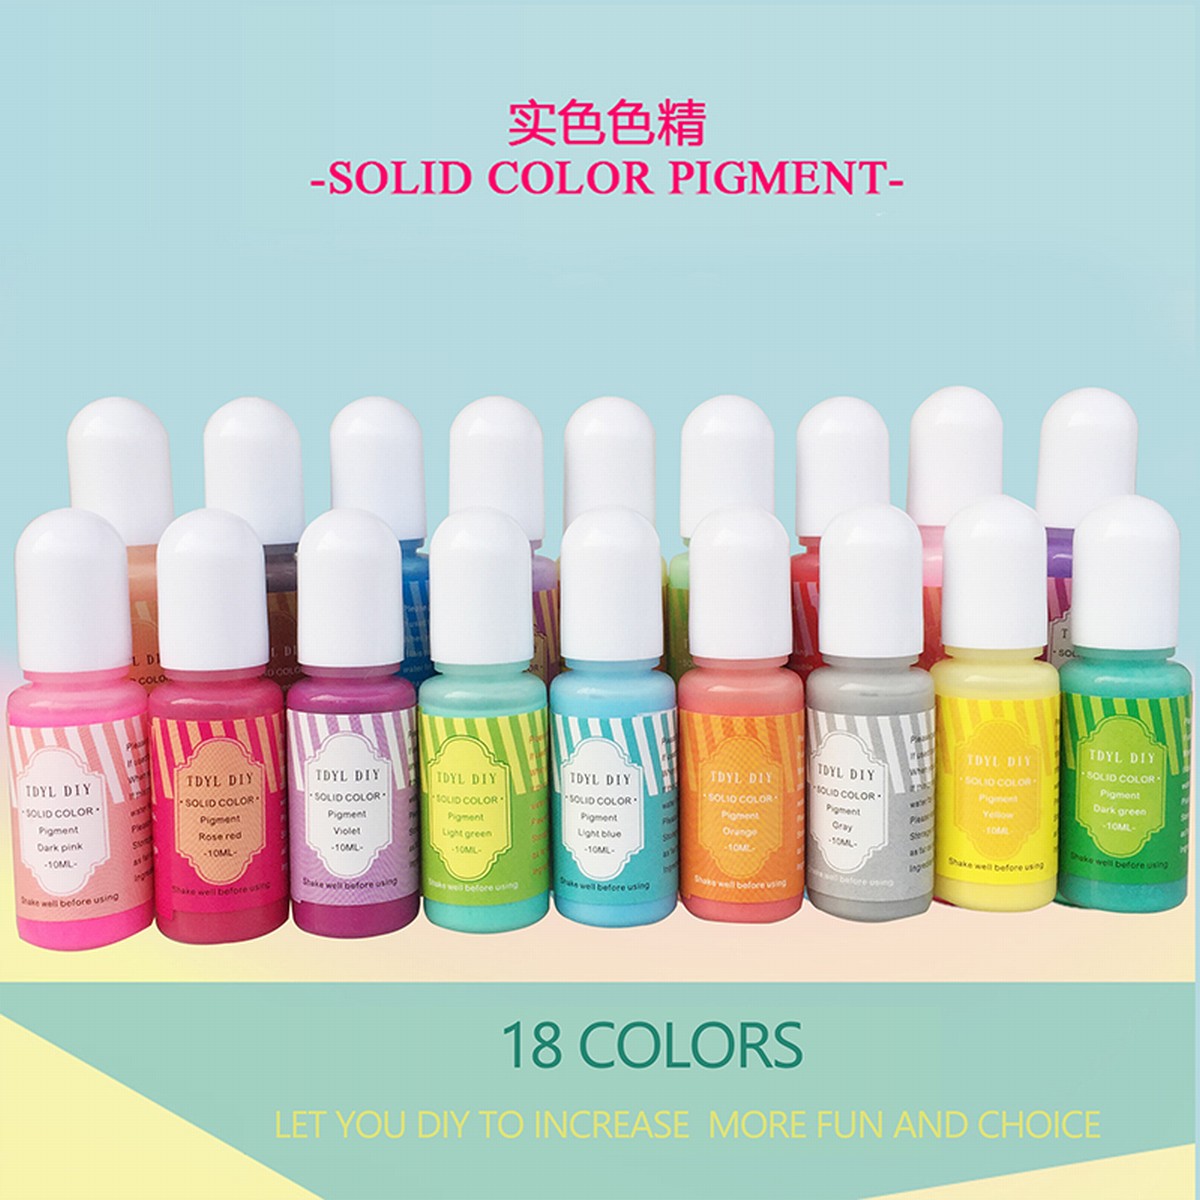 SOLID COLOR PIGMENT 18 Solid Colors Resin Pigment for DIY Handmade and Crafts Jewelry